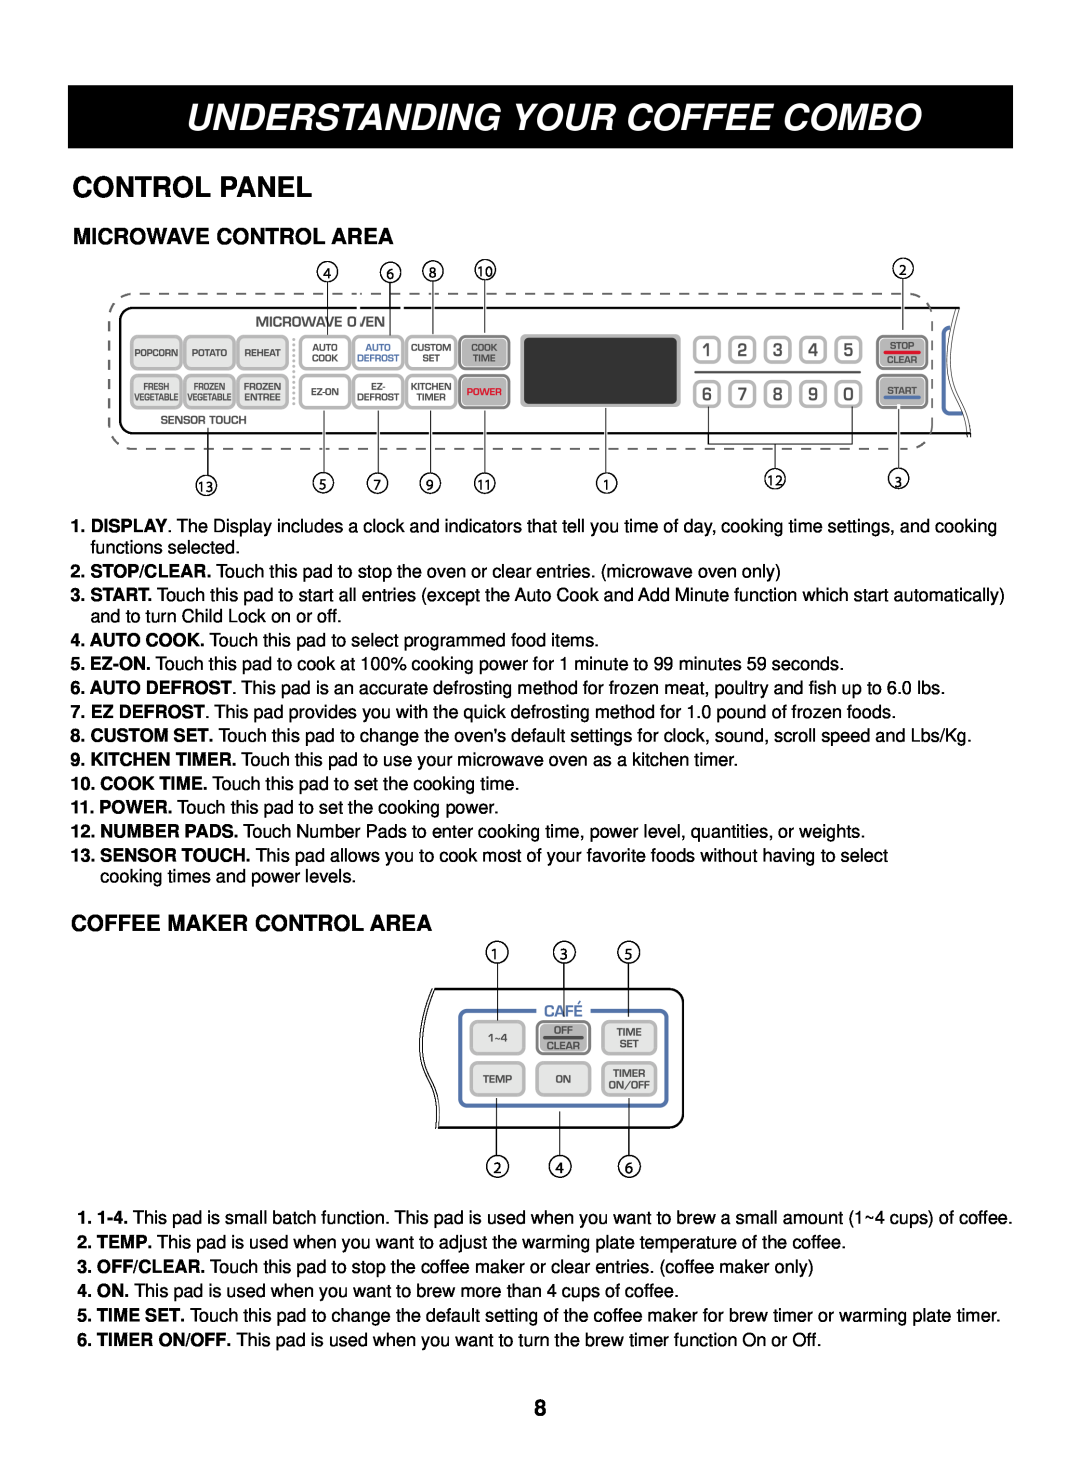 LG Electronics LCRM1240SW manual Control Panel, Understanding Your Coffee Combo, Microwave Control Area 